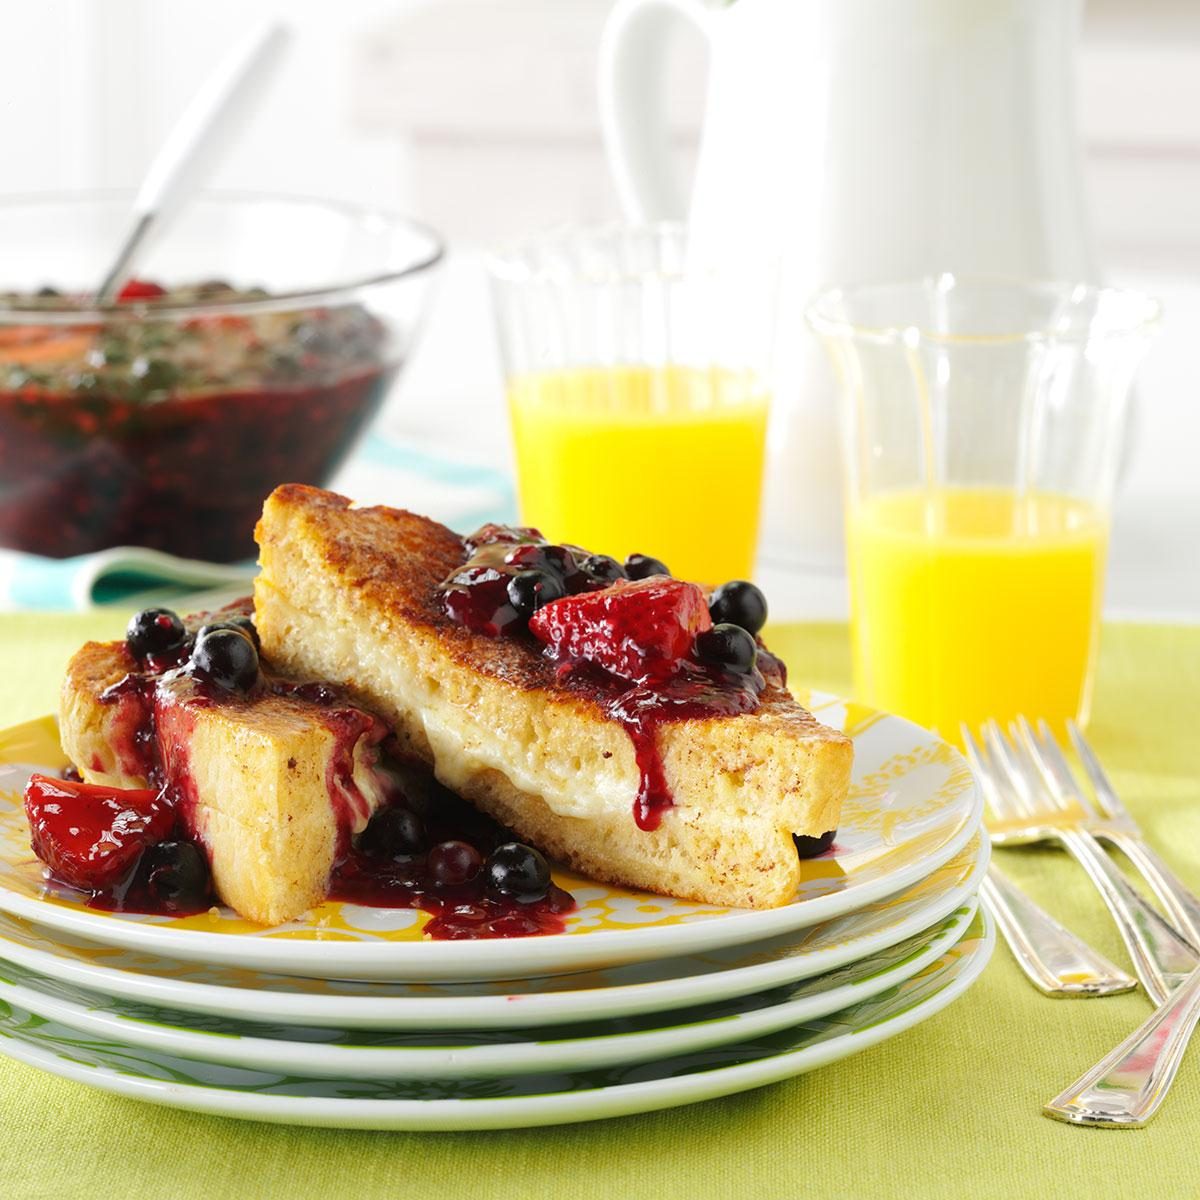 Mascarpone-Stuffed French Toast with Berry Topping